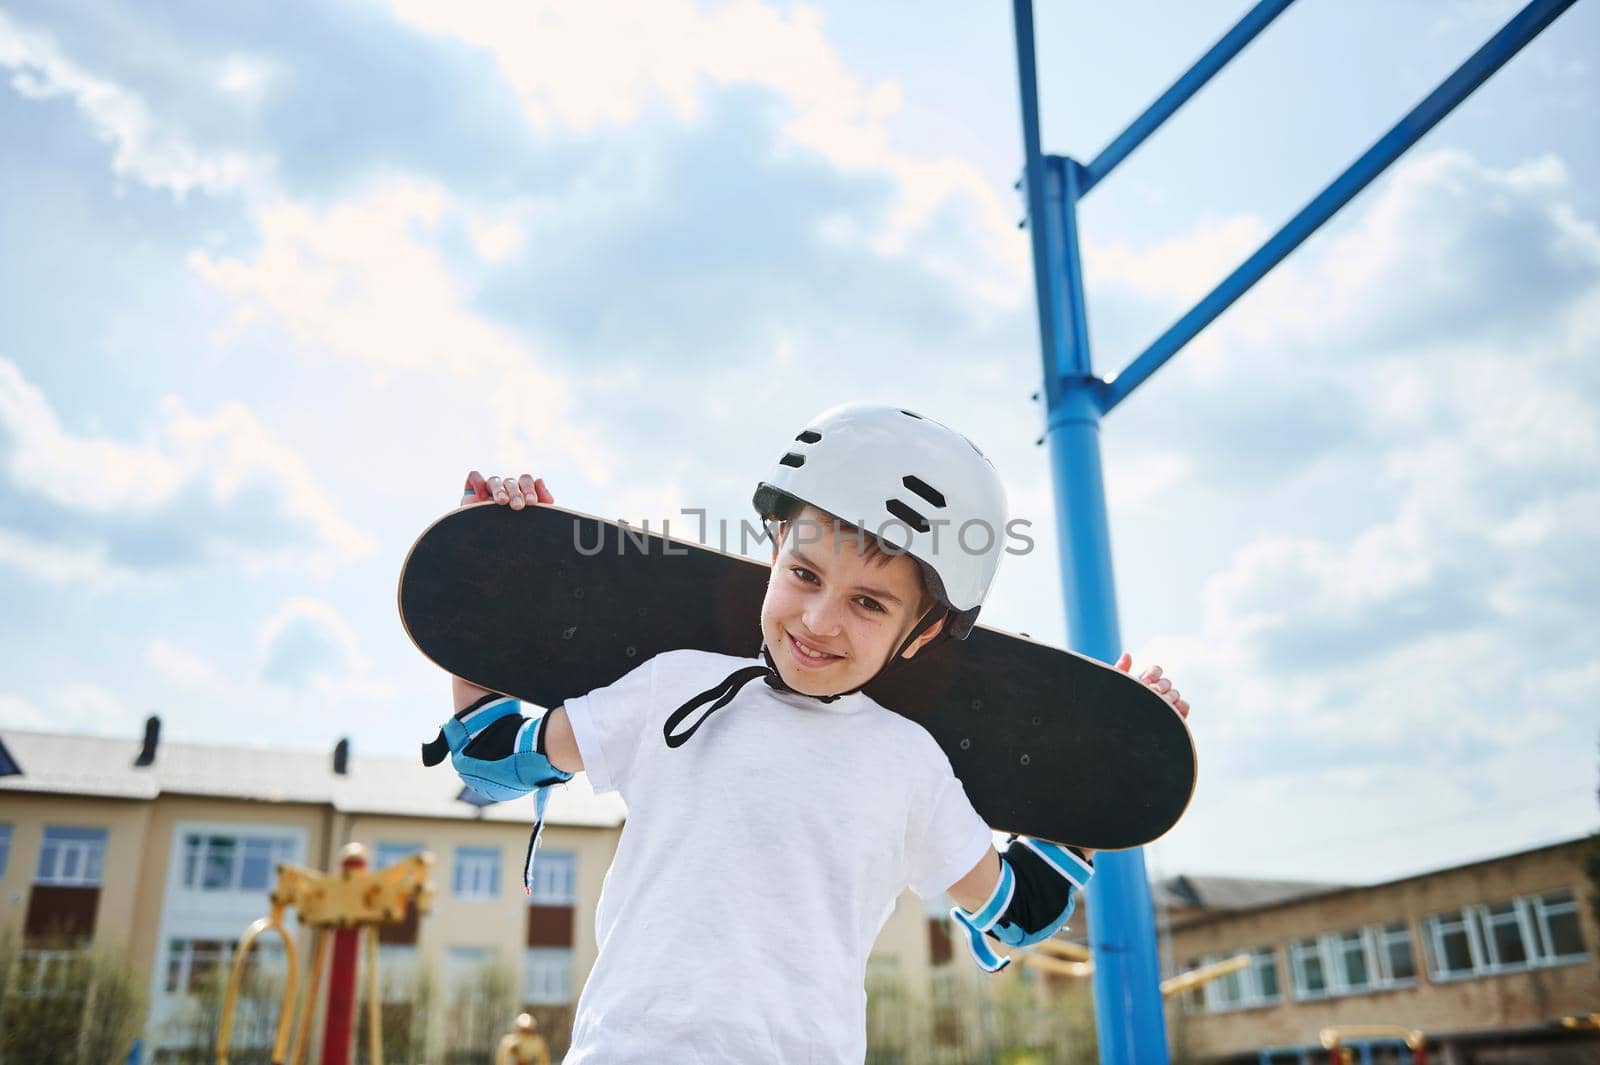 Adorable boy in a protective helmet and equipment posing with a skateboard on his shoulders behind his head against the background of a clear sky